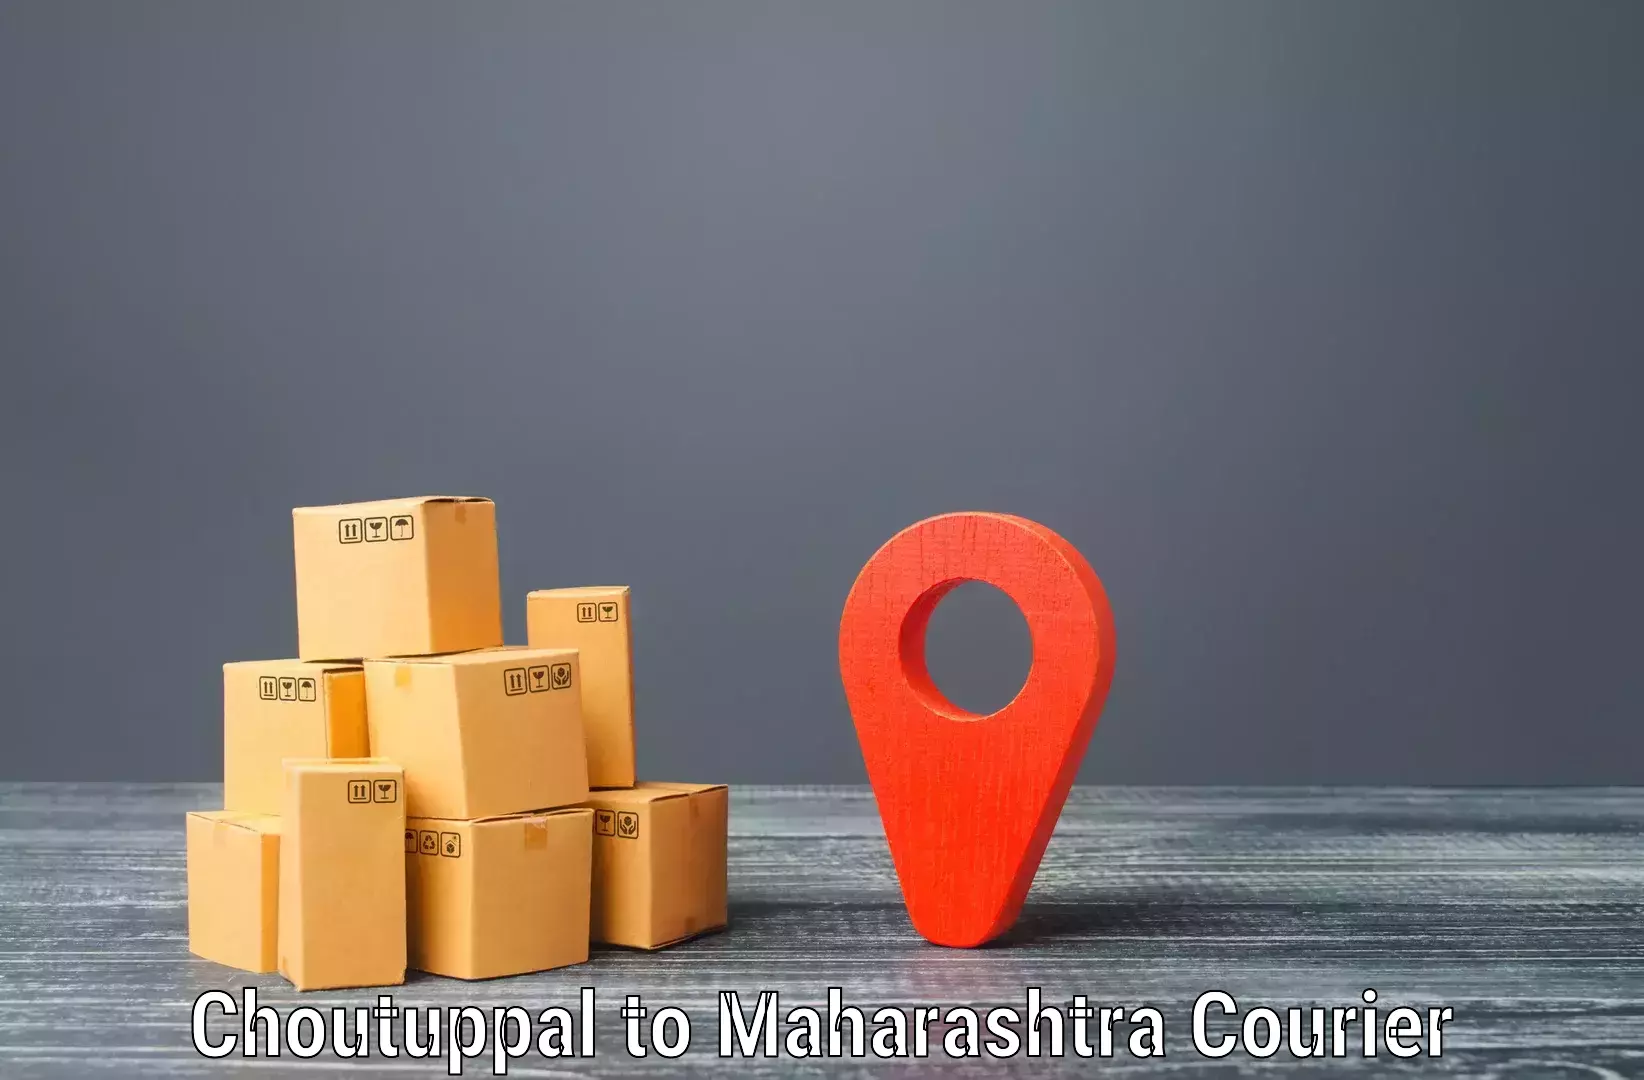 Package delivery network Choutuppal to Bhiwandi